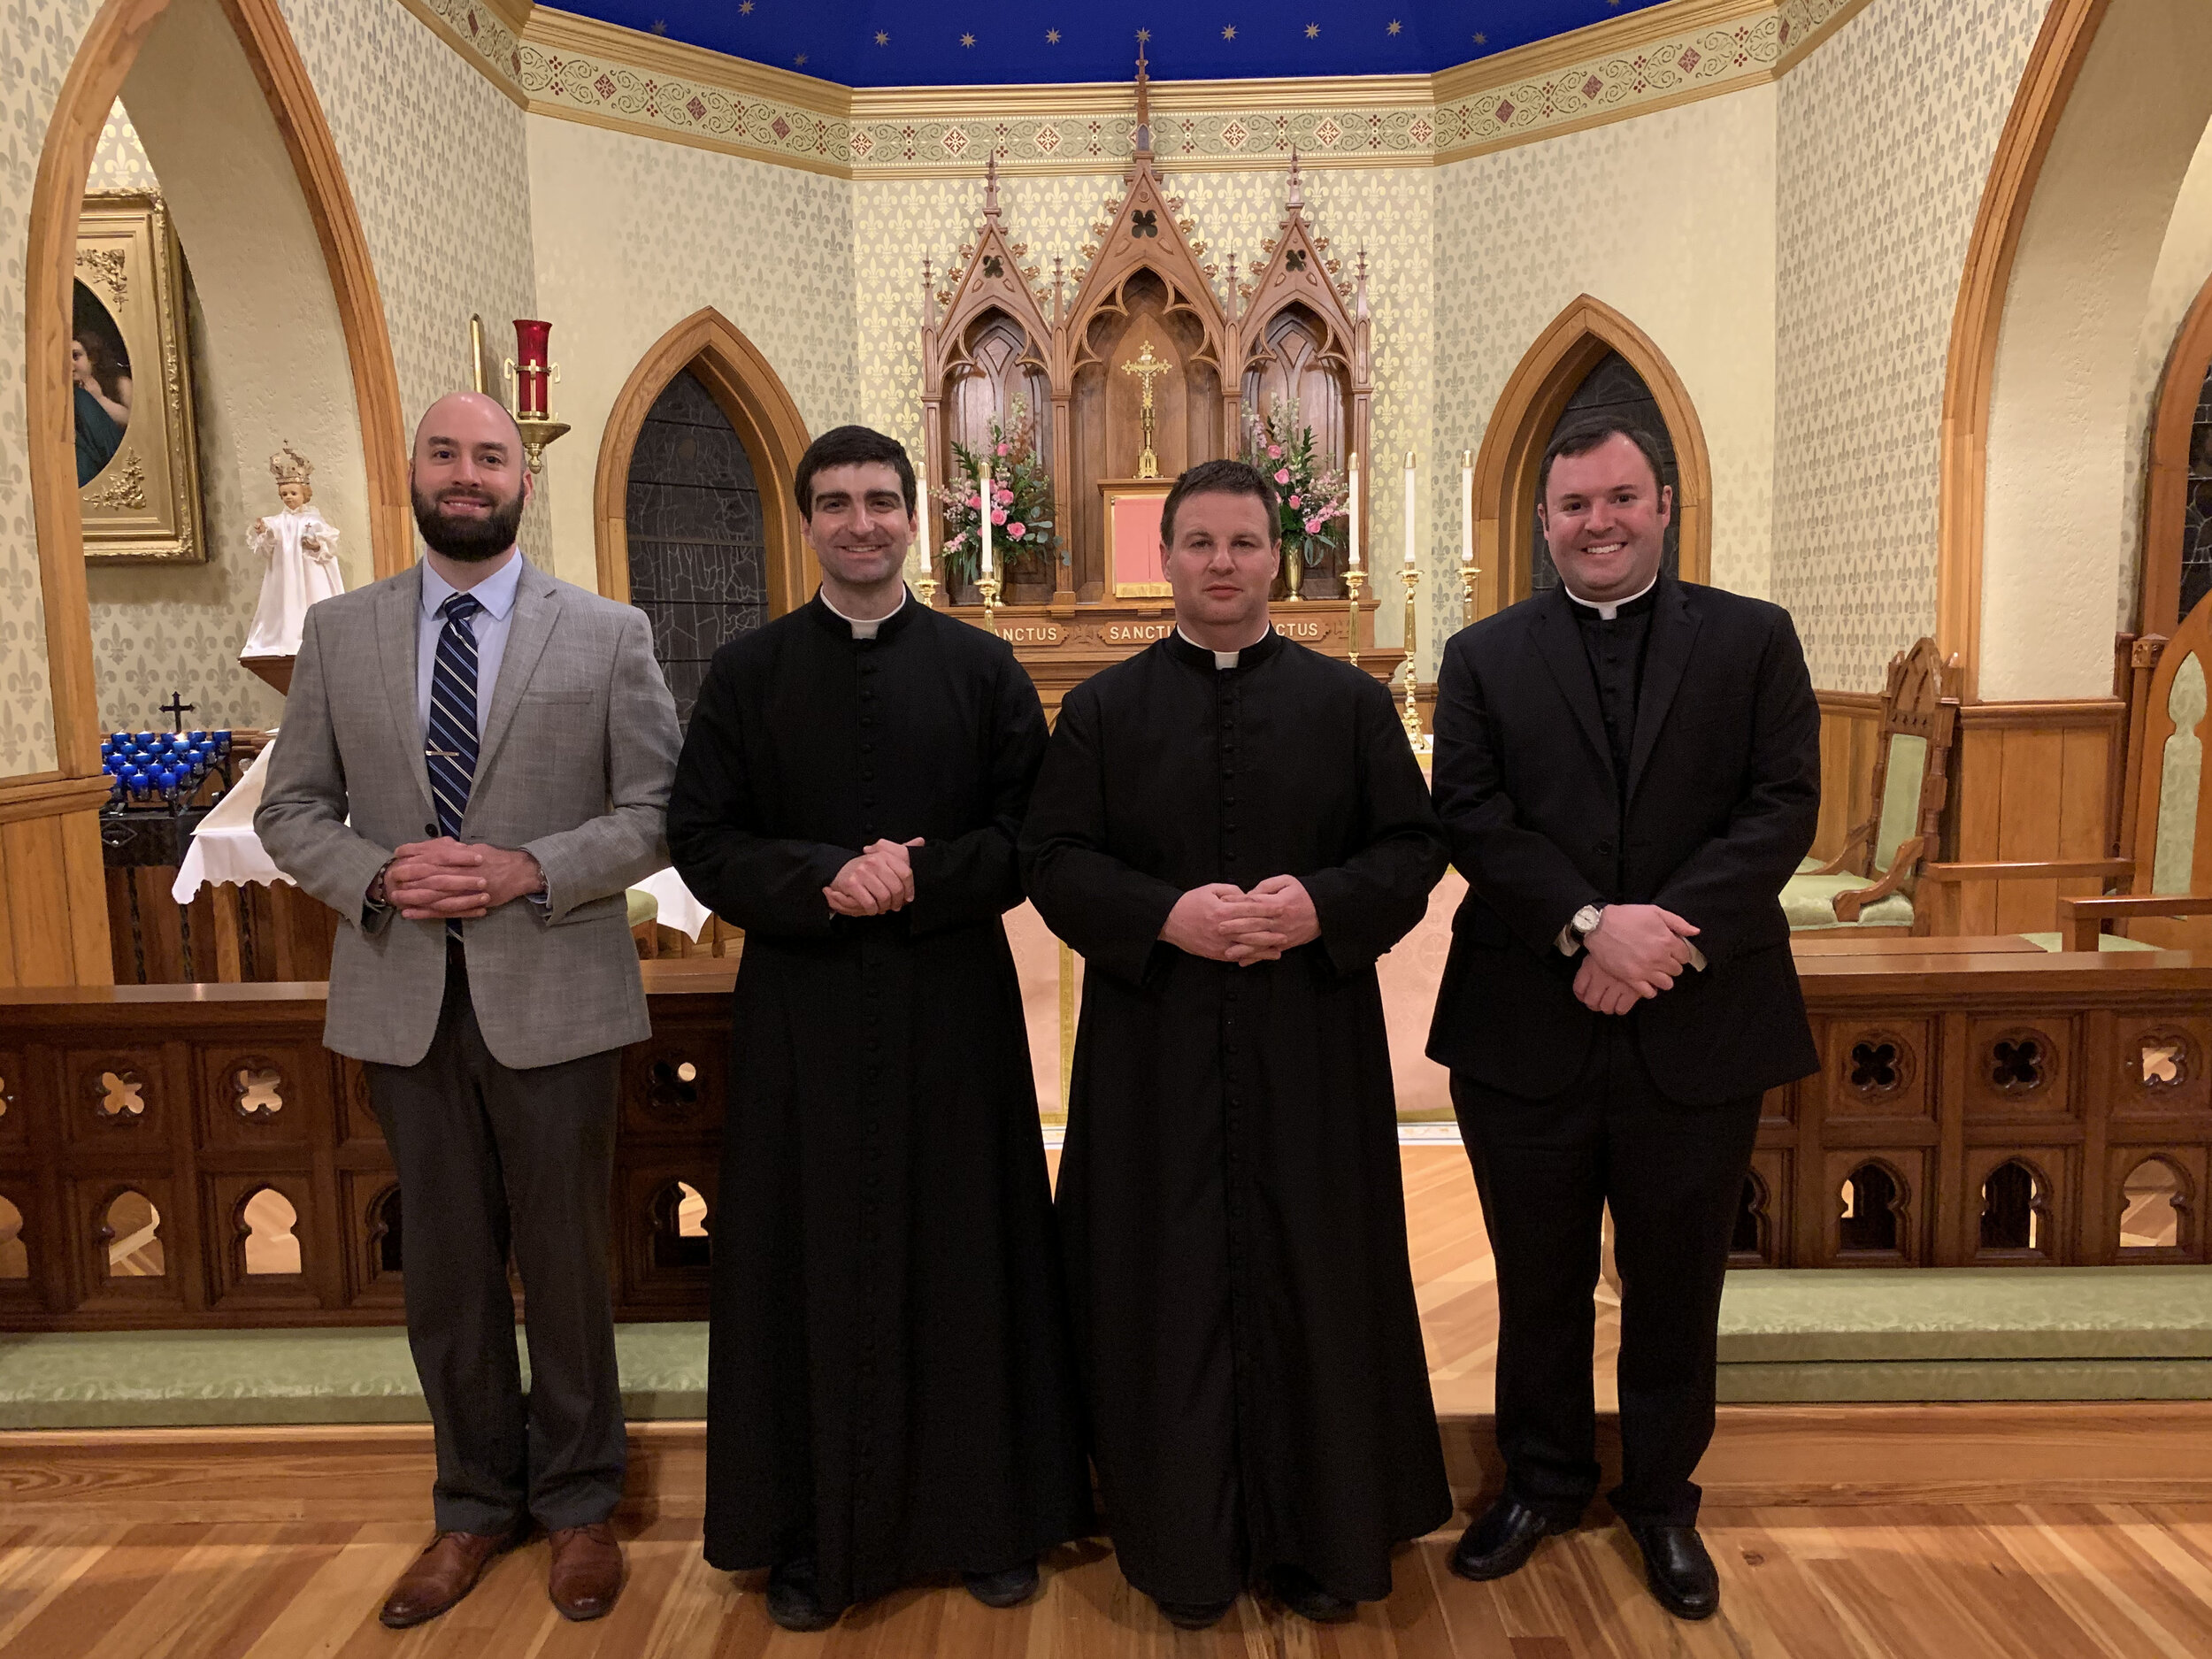  Liturgical Institute classmates Very Rev.  Justin Ward and Michael Raia were joined for the Dedication by Rev. Sam Bond from Lake Charles, LA, and Rev. Ryan Elder from Raleigh, NC.   